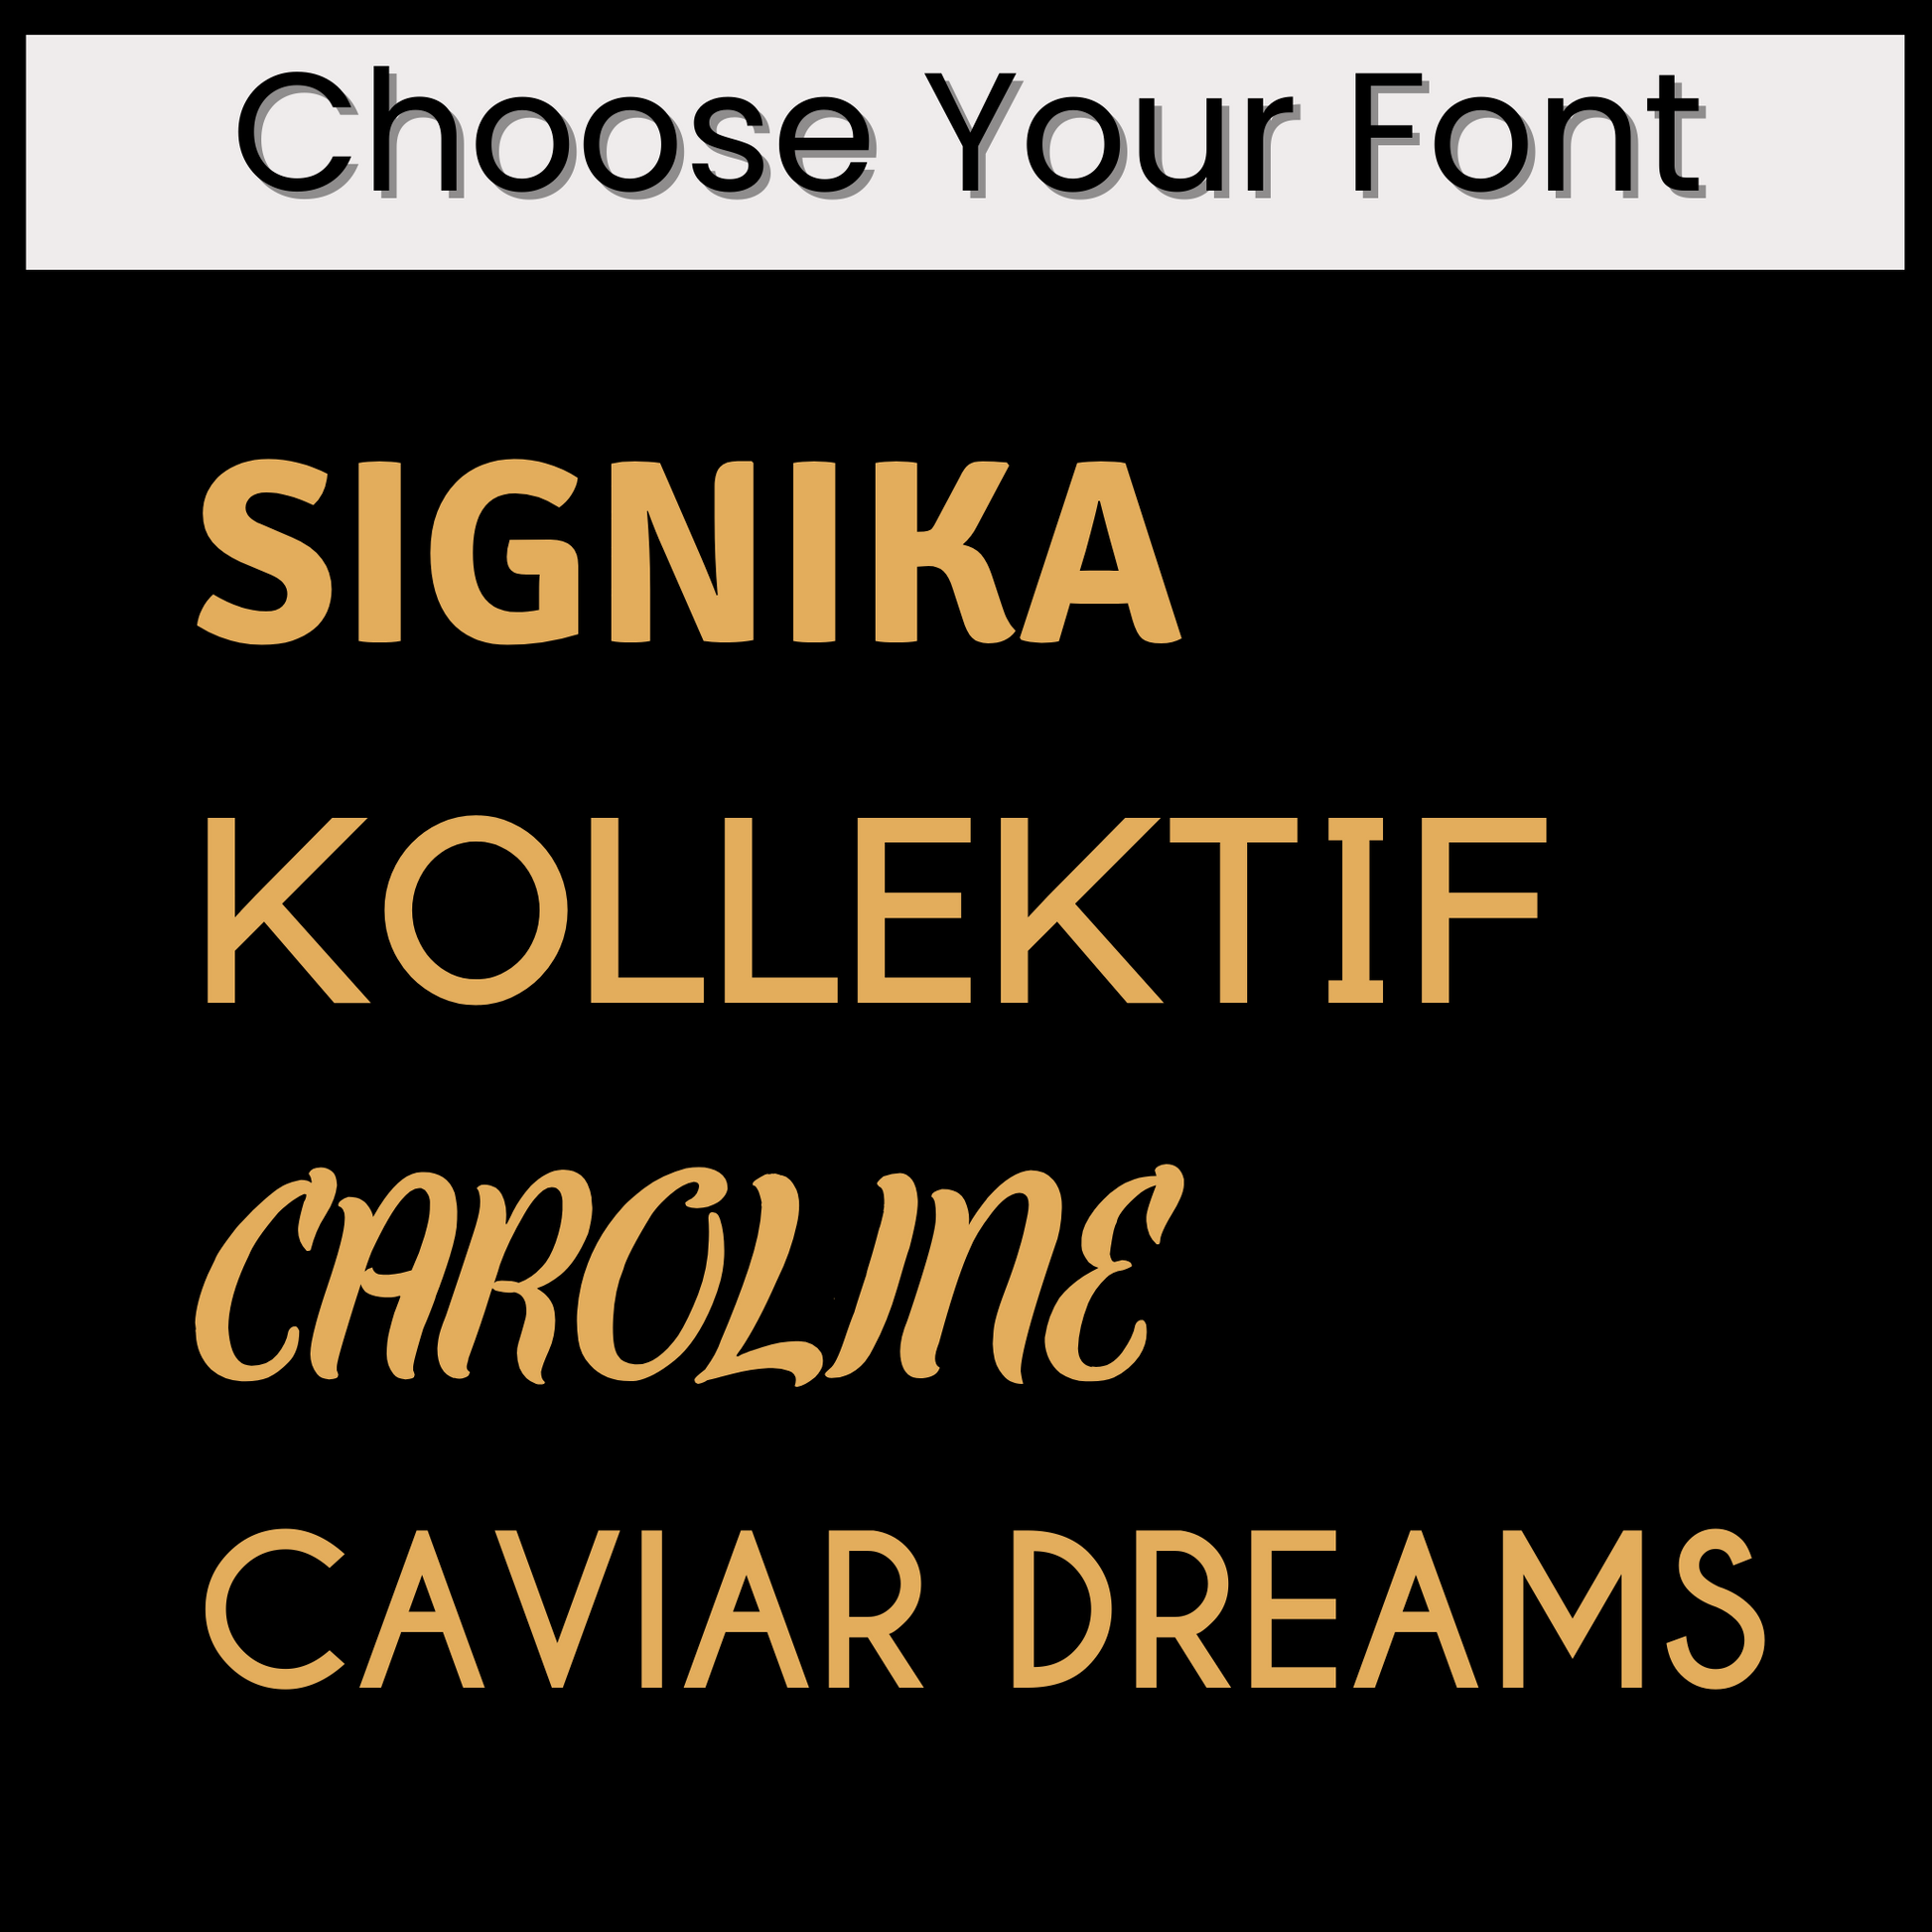 Family Name Tree of Life - Choose your Font